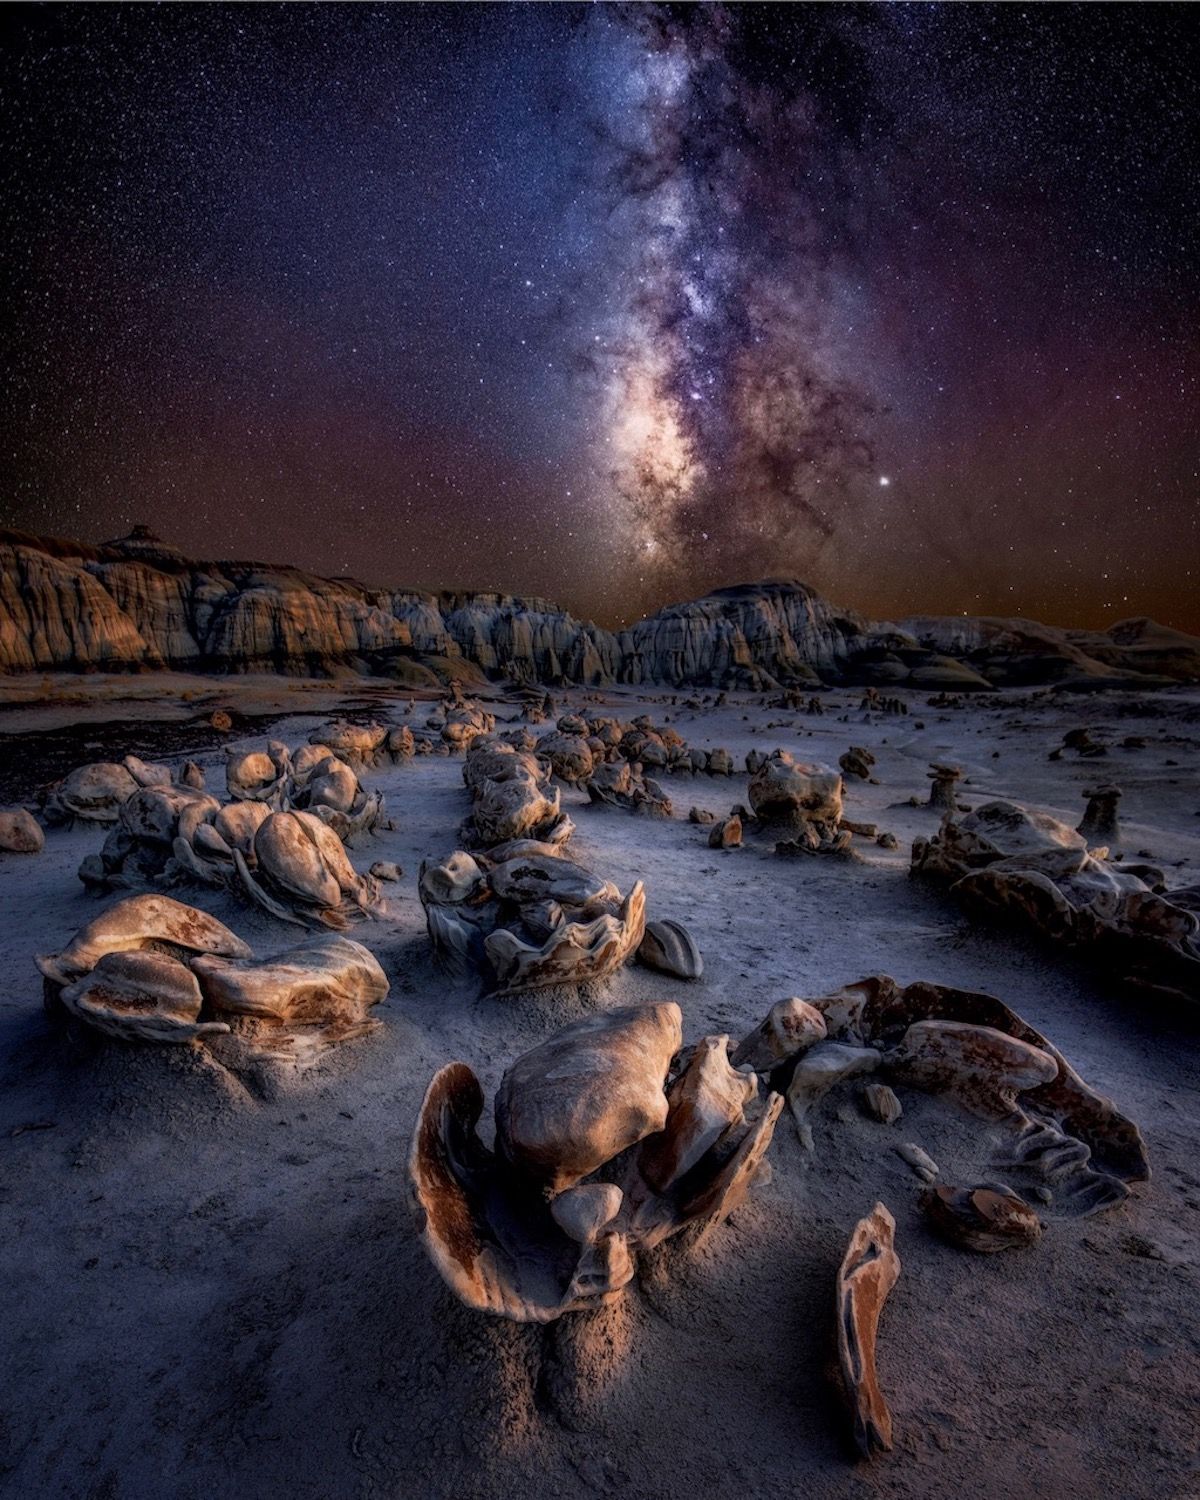 Unforgettable Image of the Milky Way